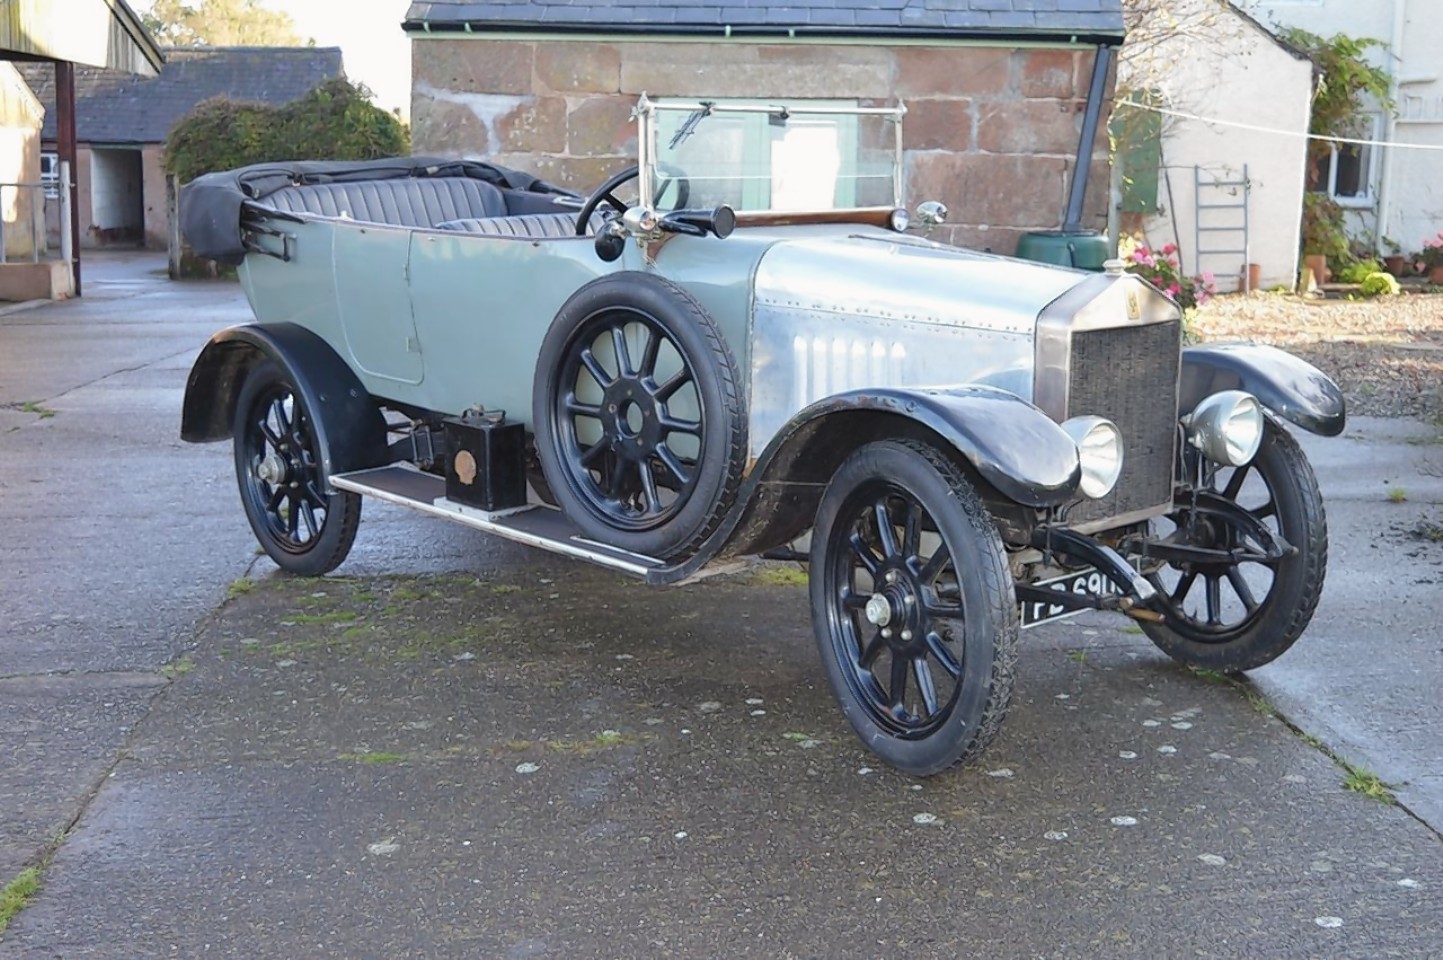 The 1920 Varley Woods four-seater tourer is currently in the Highlands